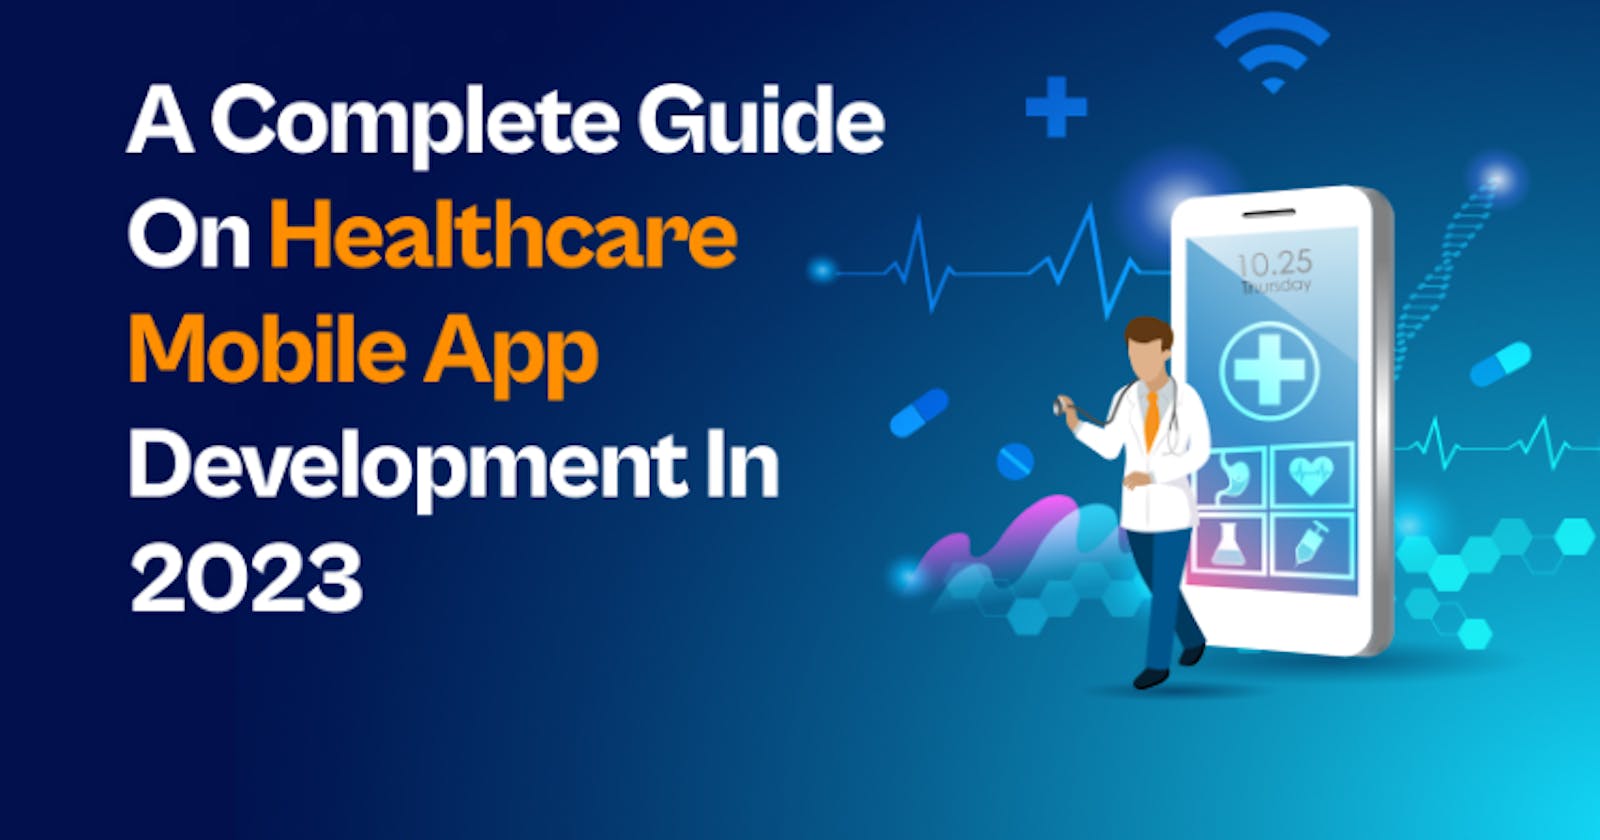 The Ultimate Guide On Healthcare Mobile App Development in 2023